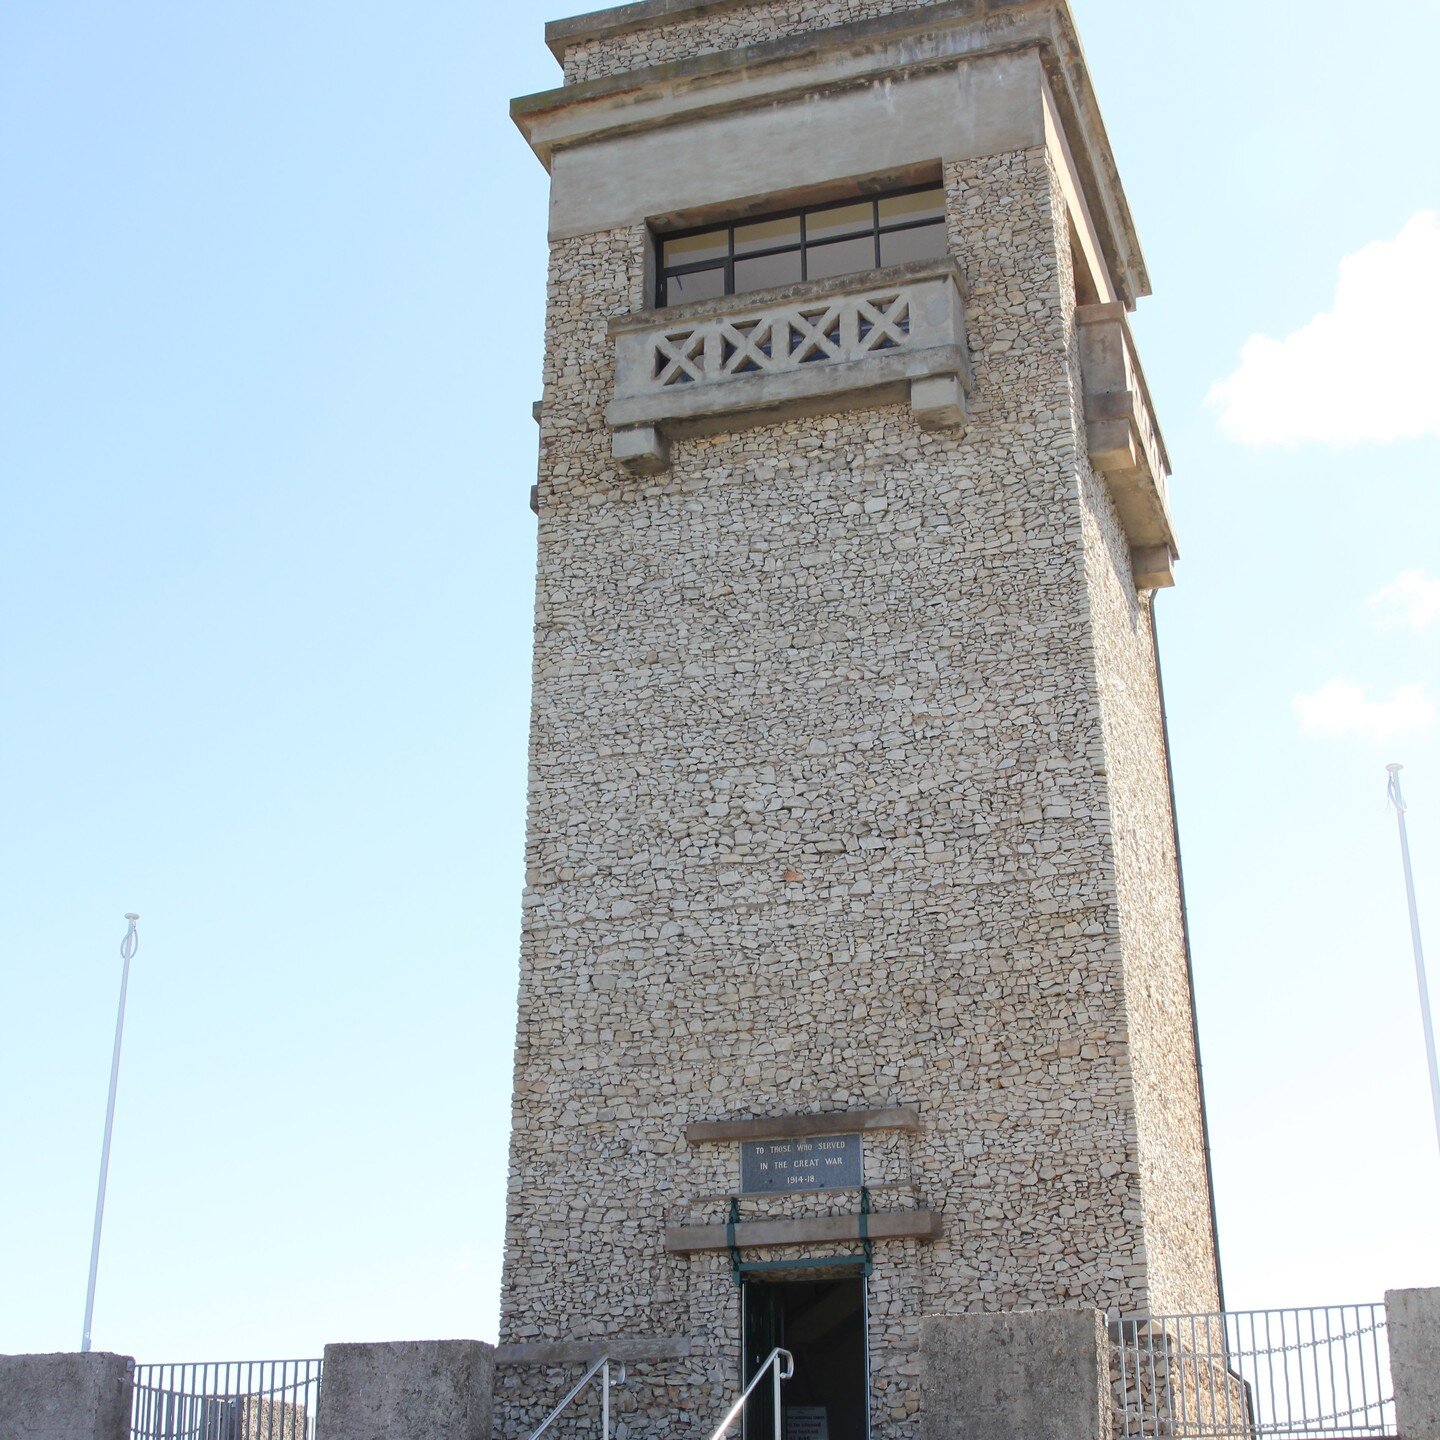 Goulburn War Memorial on Rocky Hill is a tribute to the men of Goulburn and district who served in World War I. Inside the tower is a tablet inscribed with the names of those who enlisted from the district. The lookout gallery at the top of the Memor